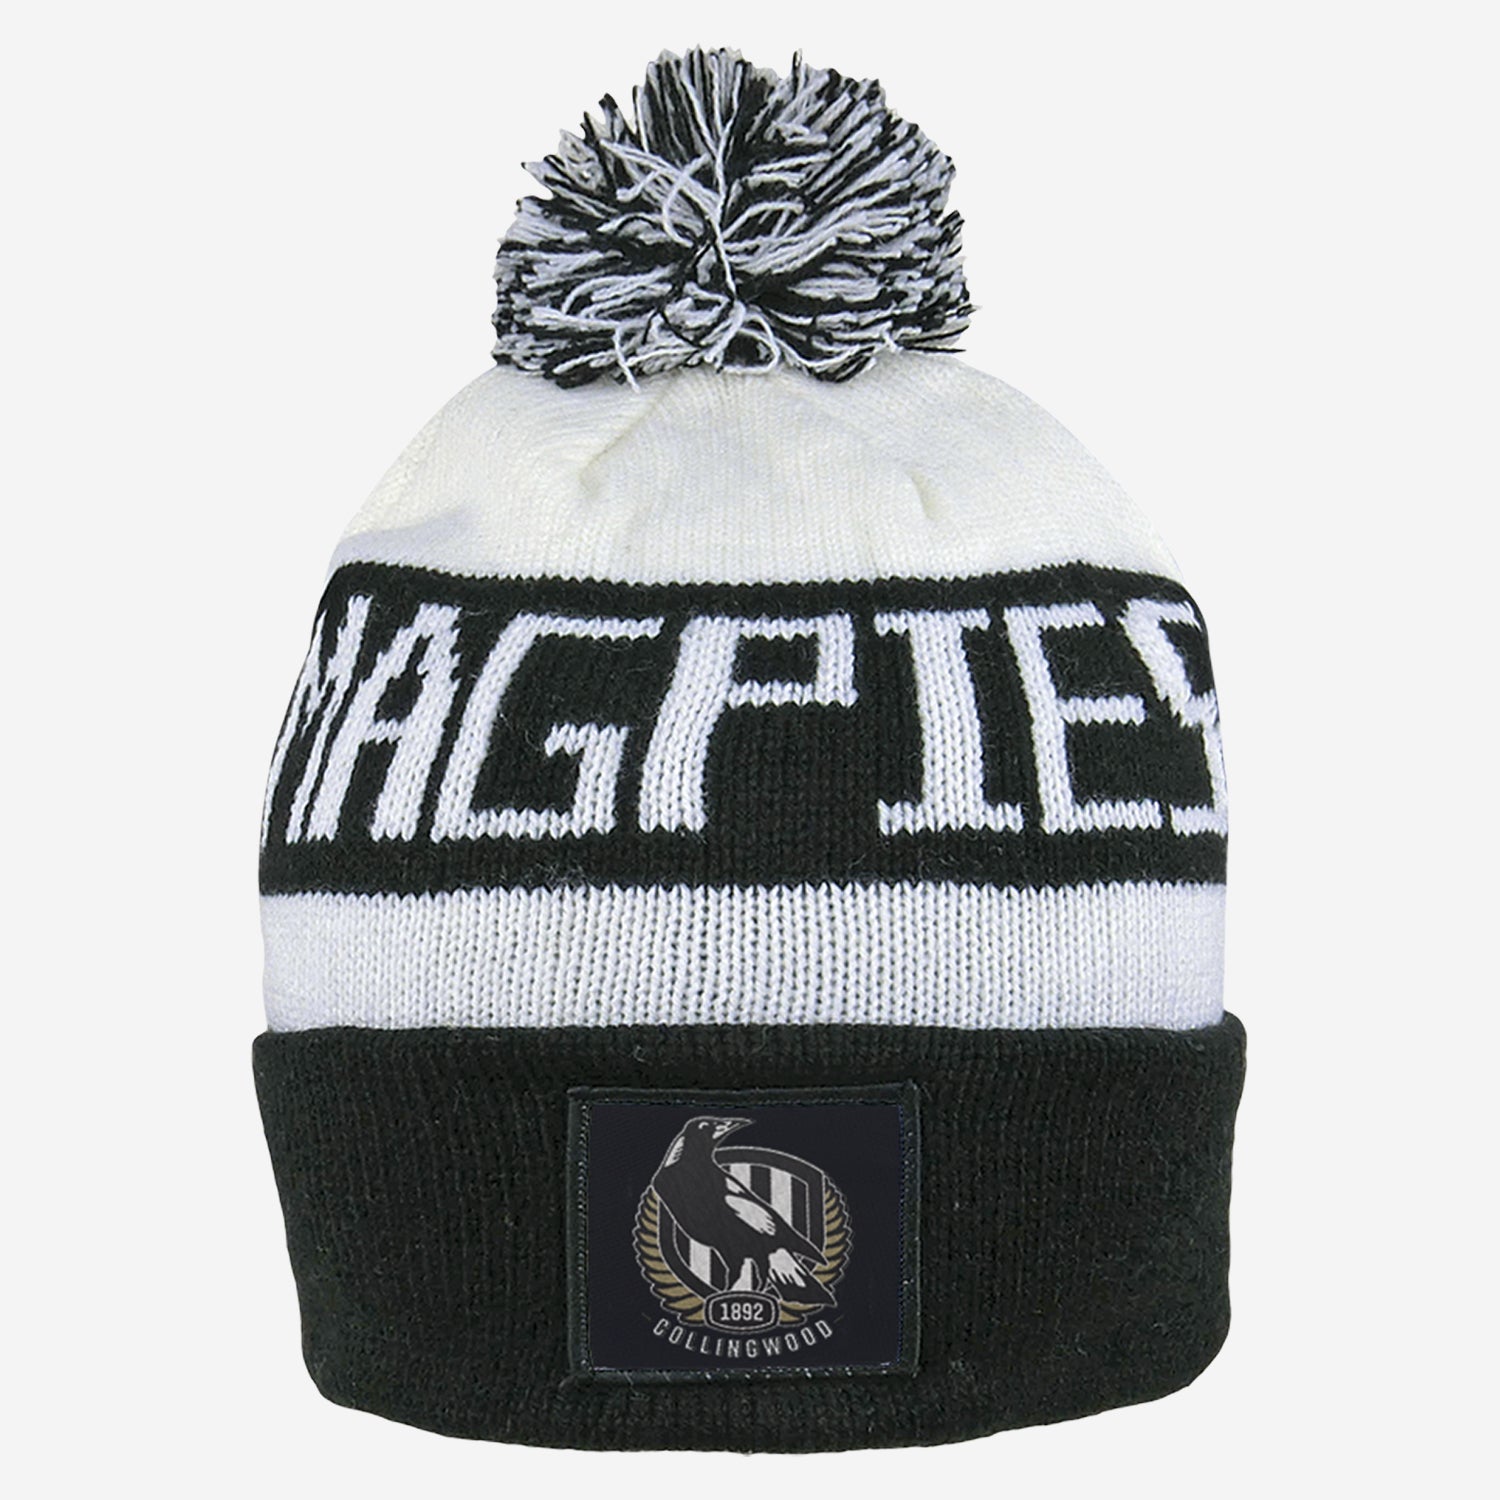 Collingwood Magpies - Beanie - The Cricket Warehouse